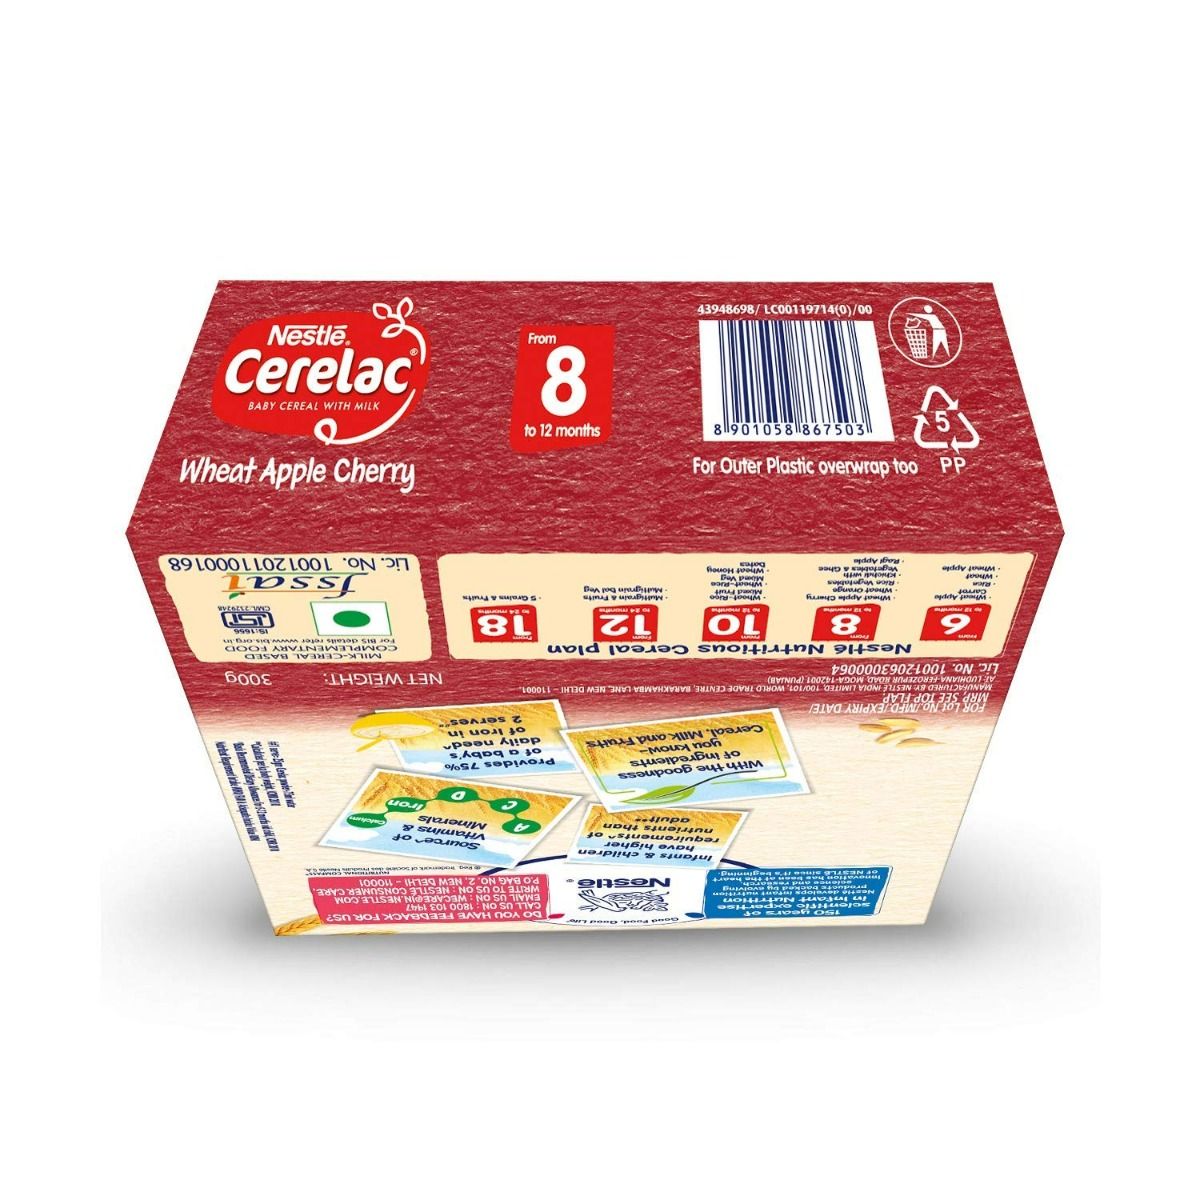 Nestle Cerelac Baby Cereal with Milk Wheat Apple Cherry (From 8 to 12 Months) Powder, 300 gm Refill Pack, Pack of 1 